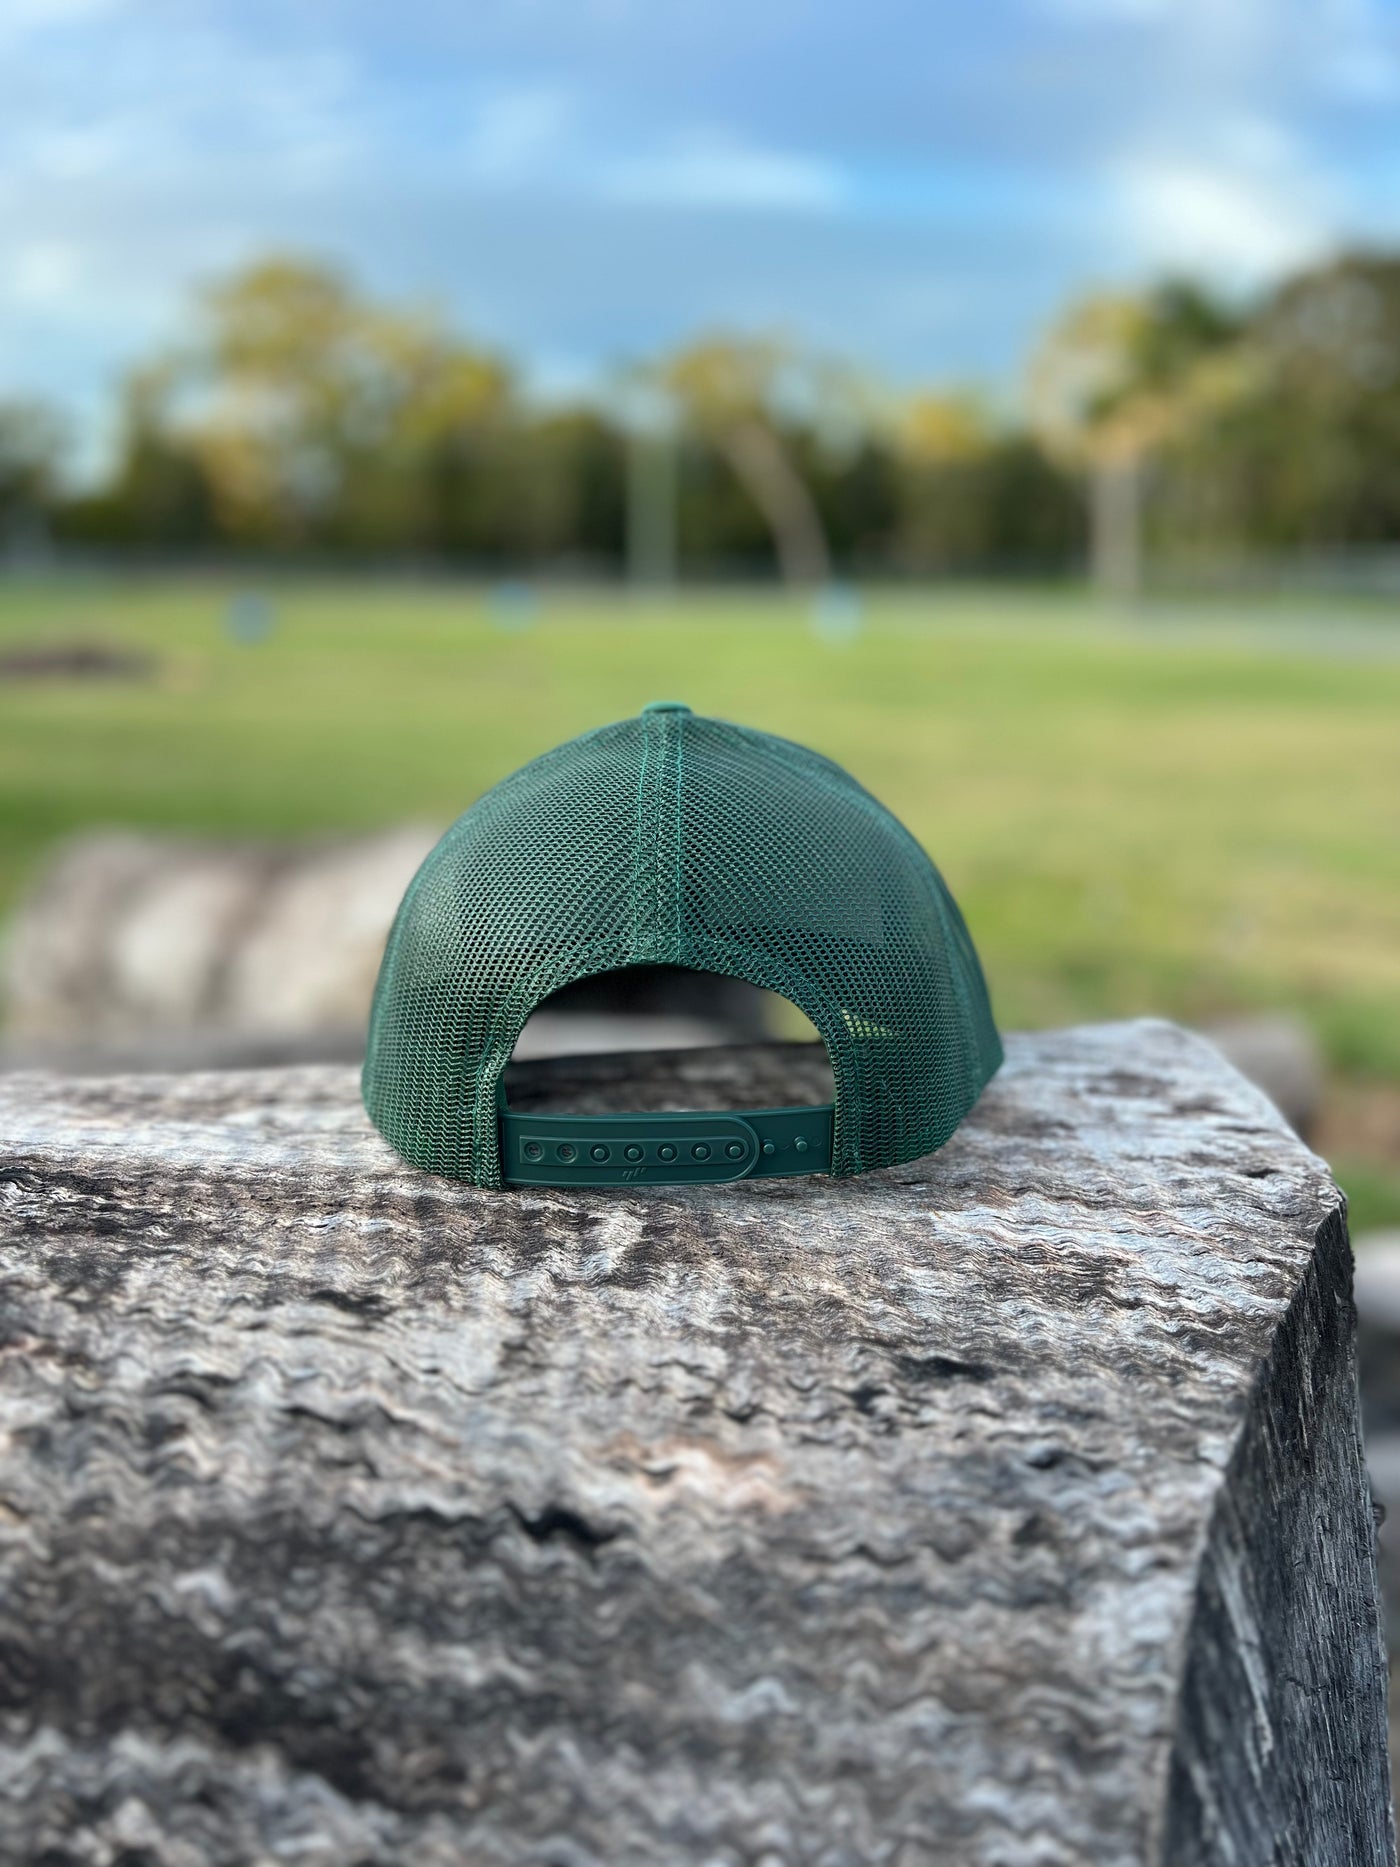 Country Labelled Cap - Green Bass Fishing